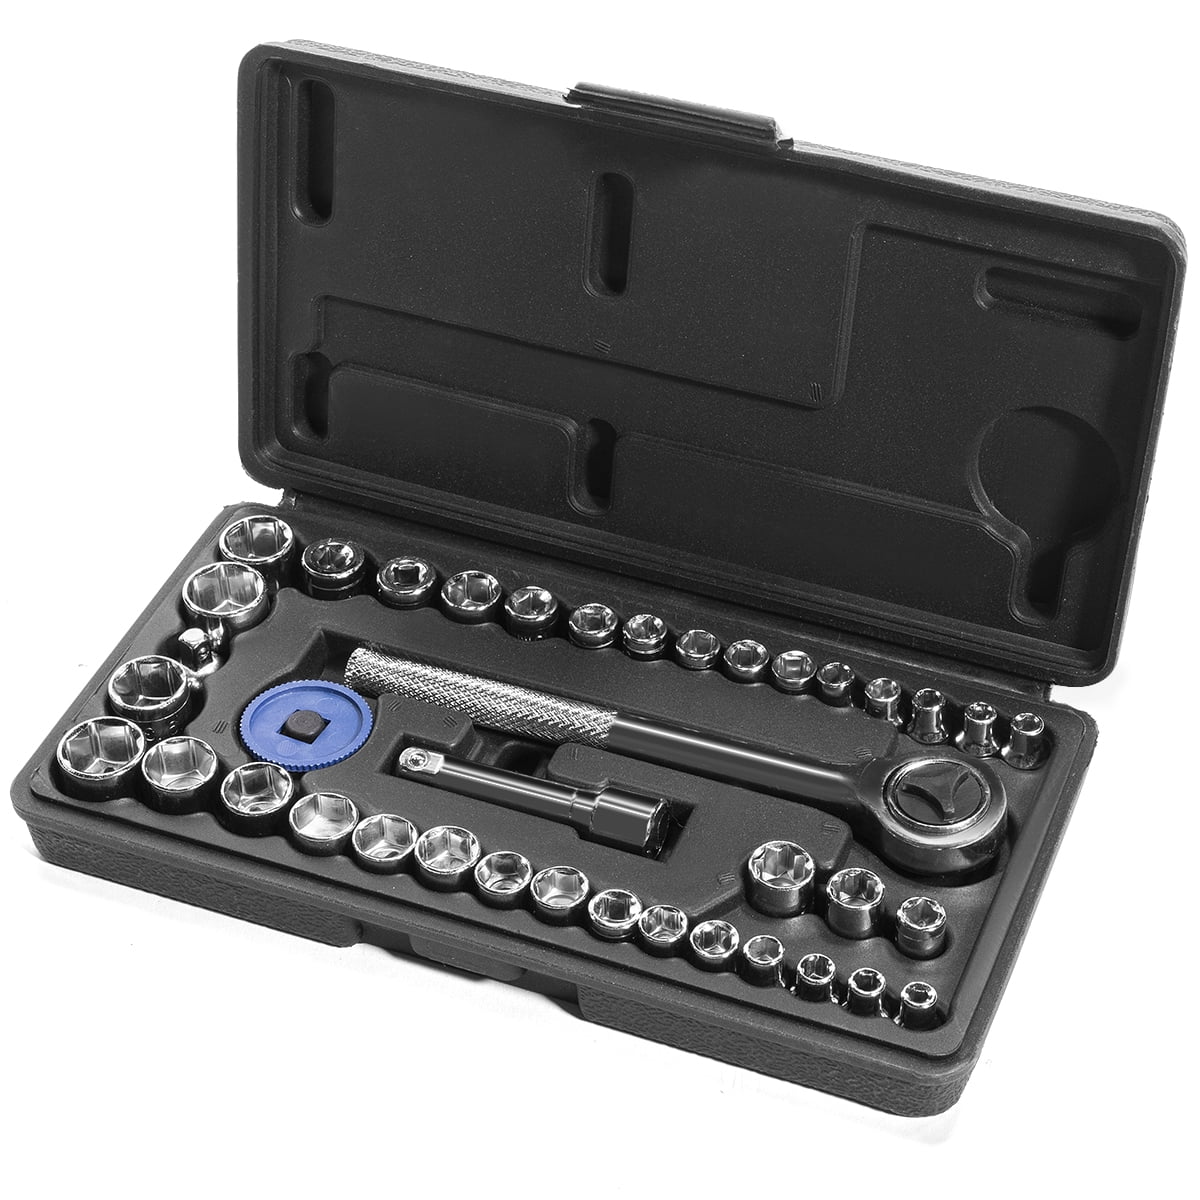 w//Ratchet Handle Extension Bar Carrying Case XtremepowerUS 40-Pieces Socket Set SAE and Metric Sockets Kit 1//4 /& 3//8